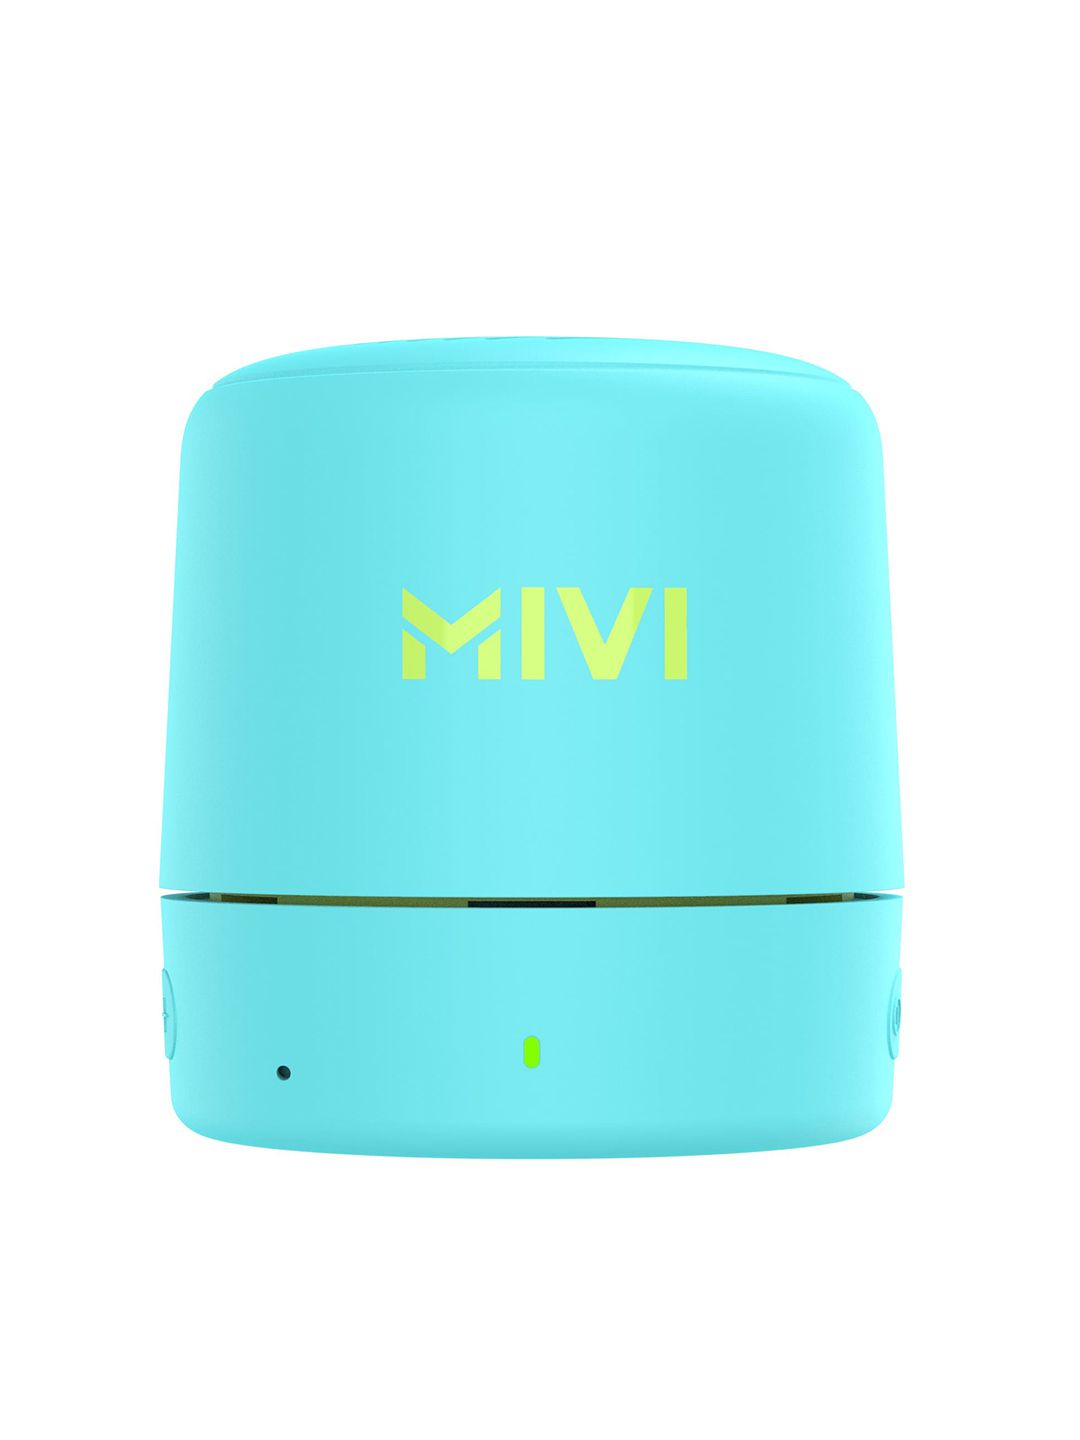 mivi Turquoise Blue Play Bluetooth Speaker with 12 Hours Playtime Price in India